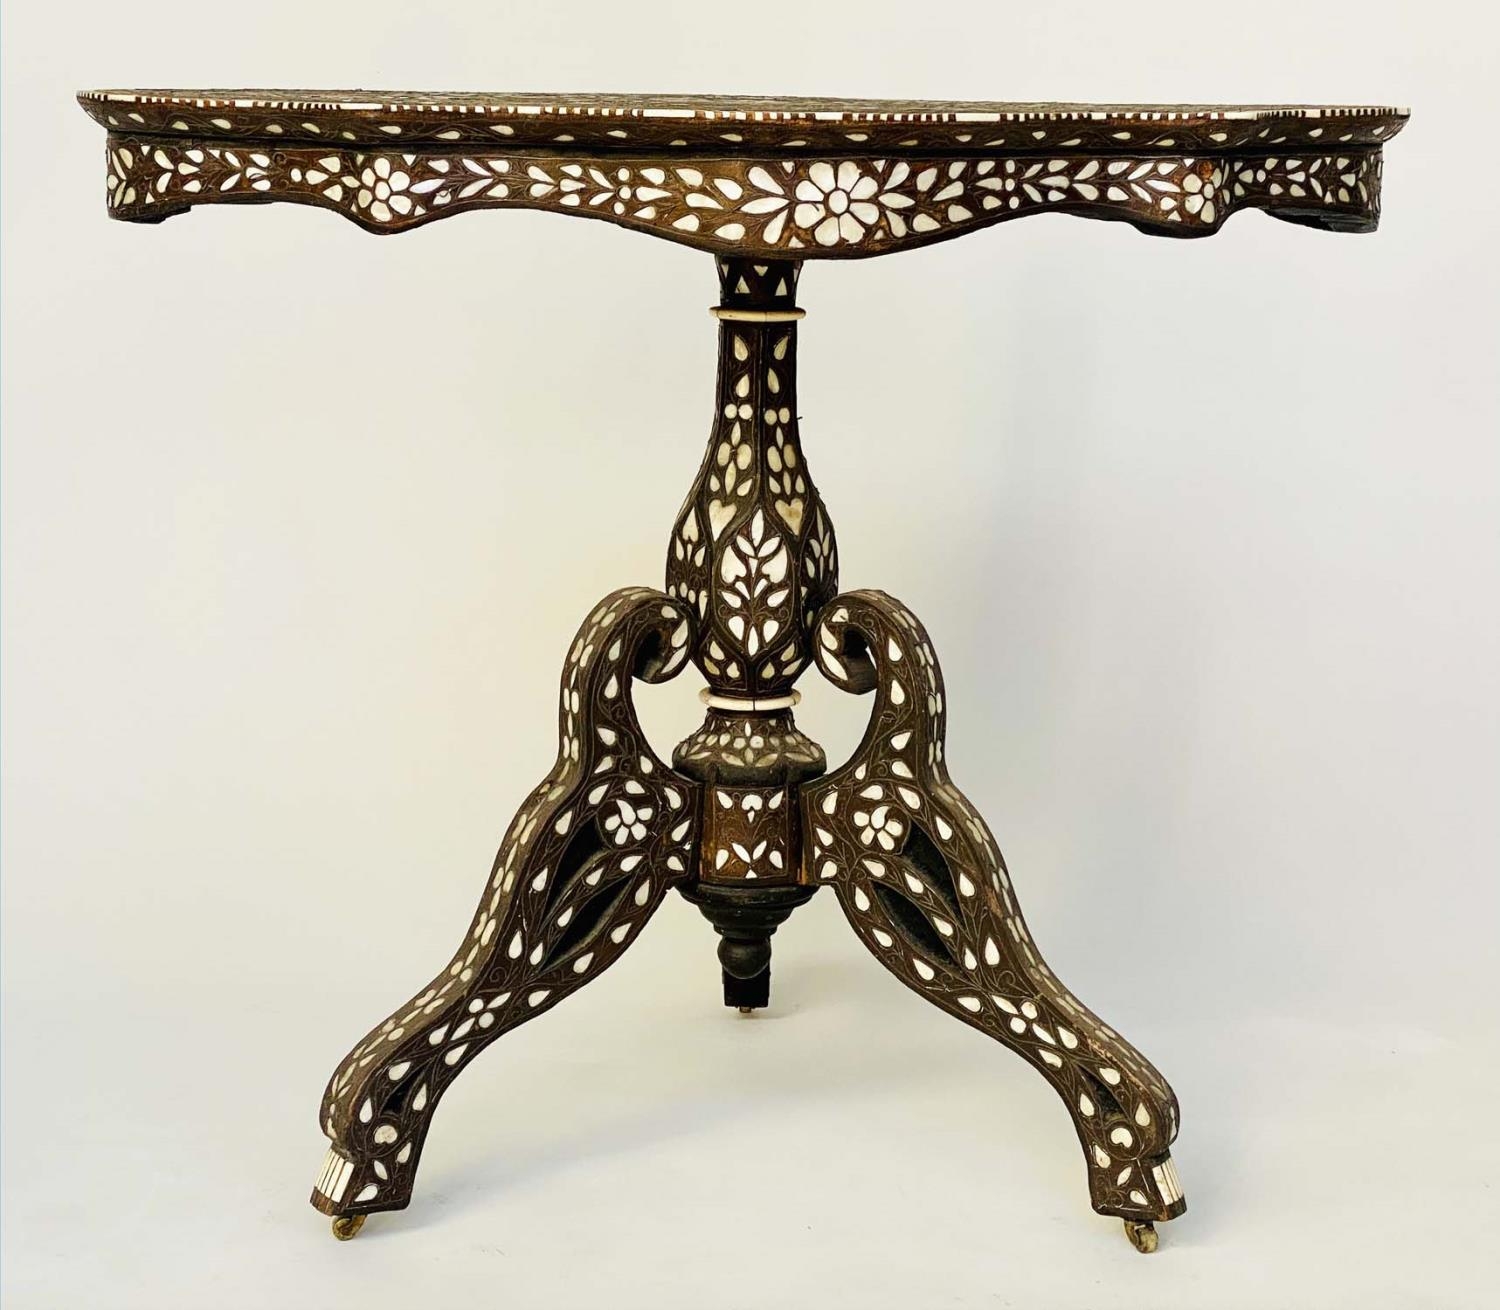 SYRIAN CENTRE TABLE, late 19th/early 20th century hardwood and allover bone, mother of pearl and